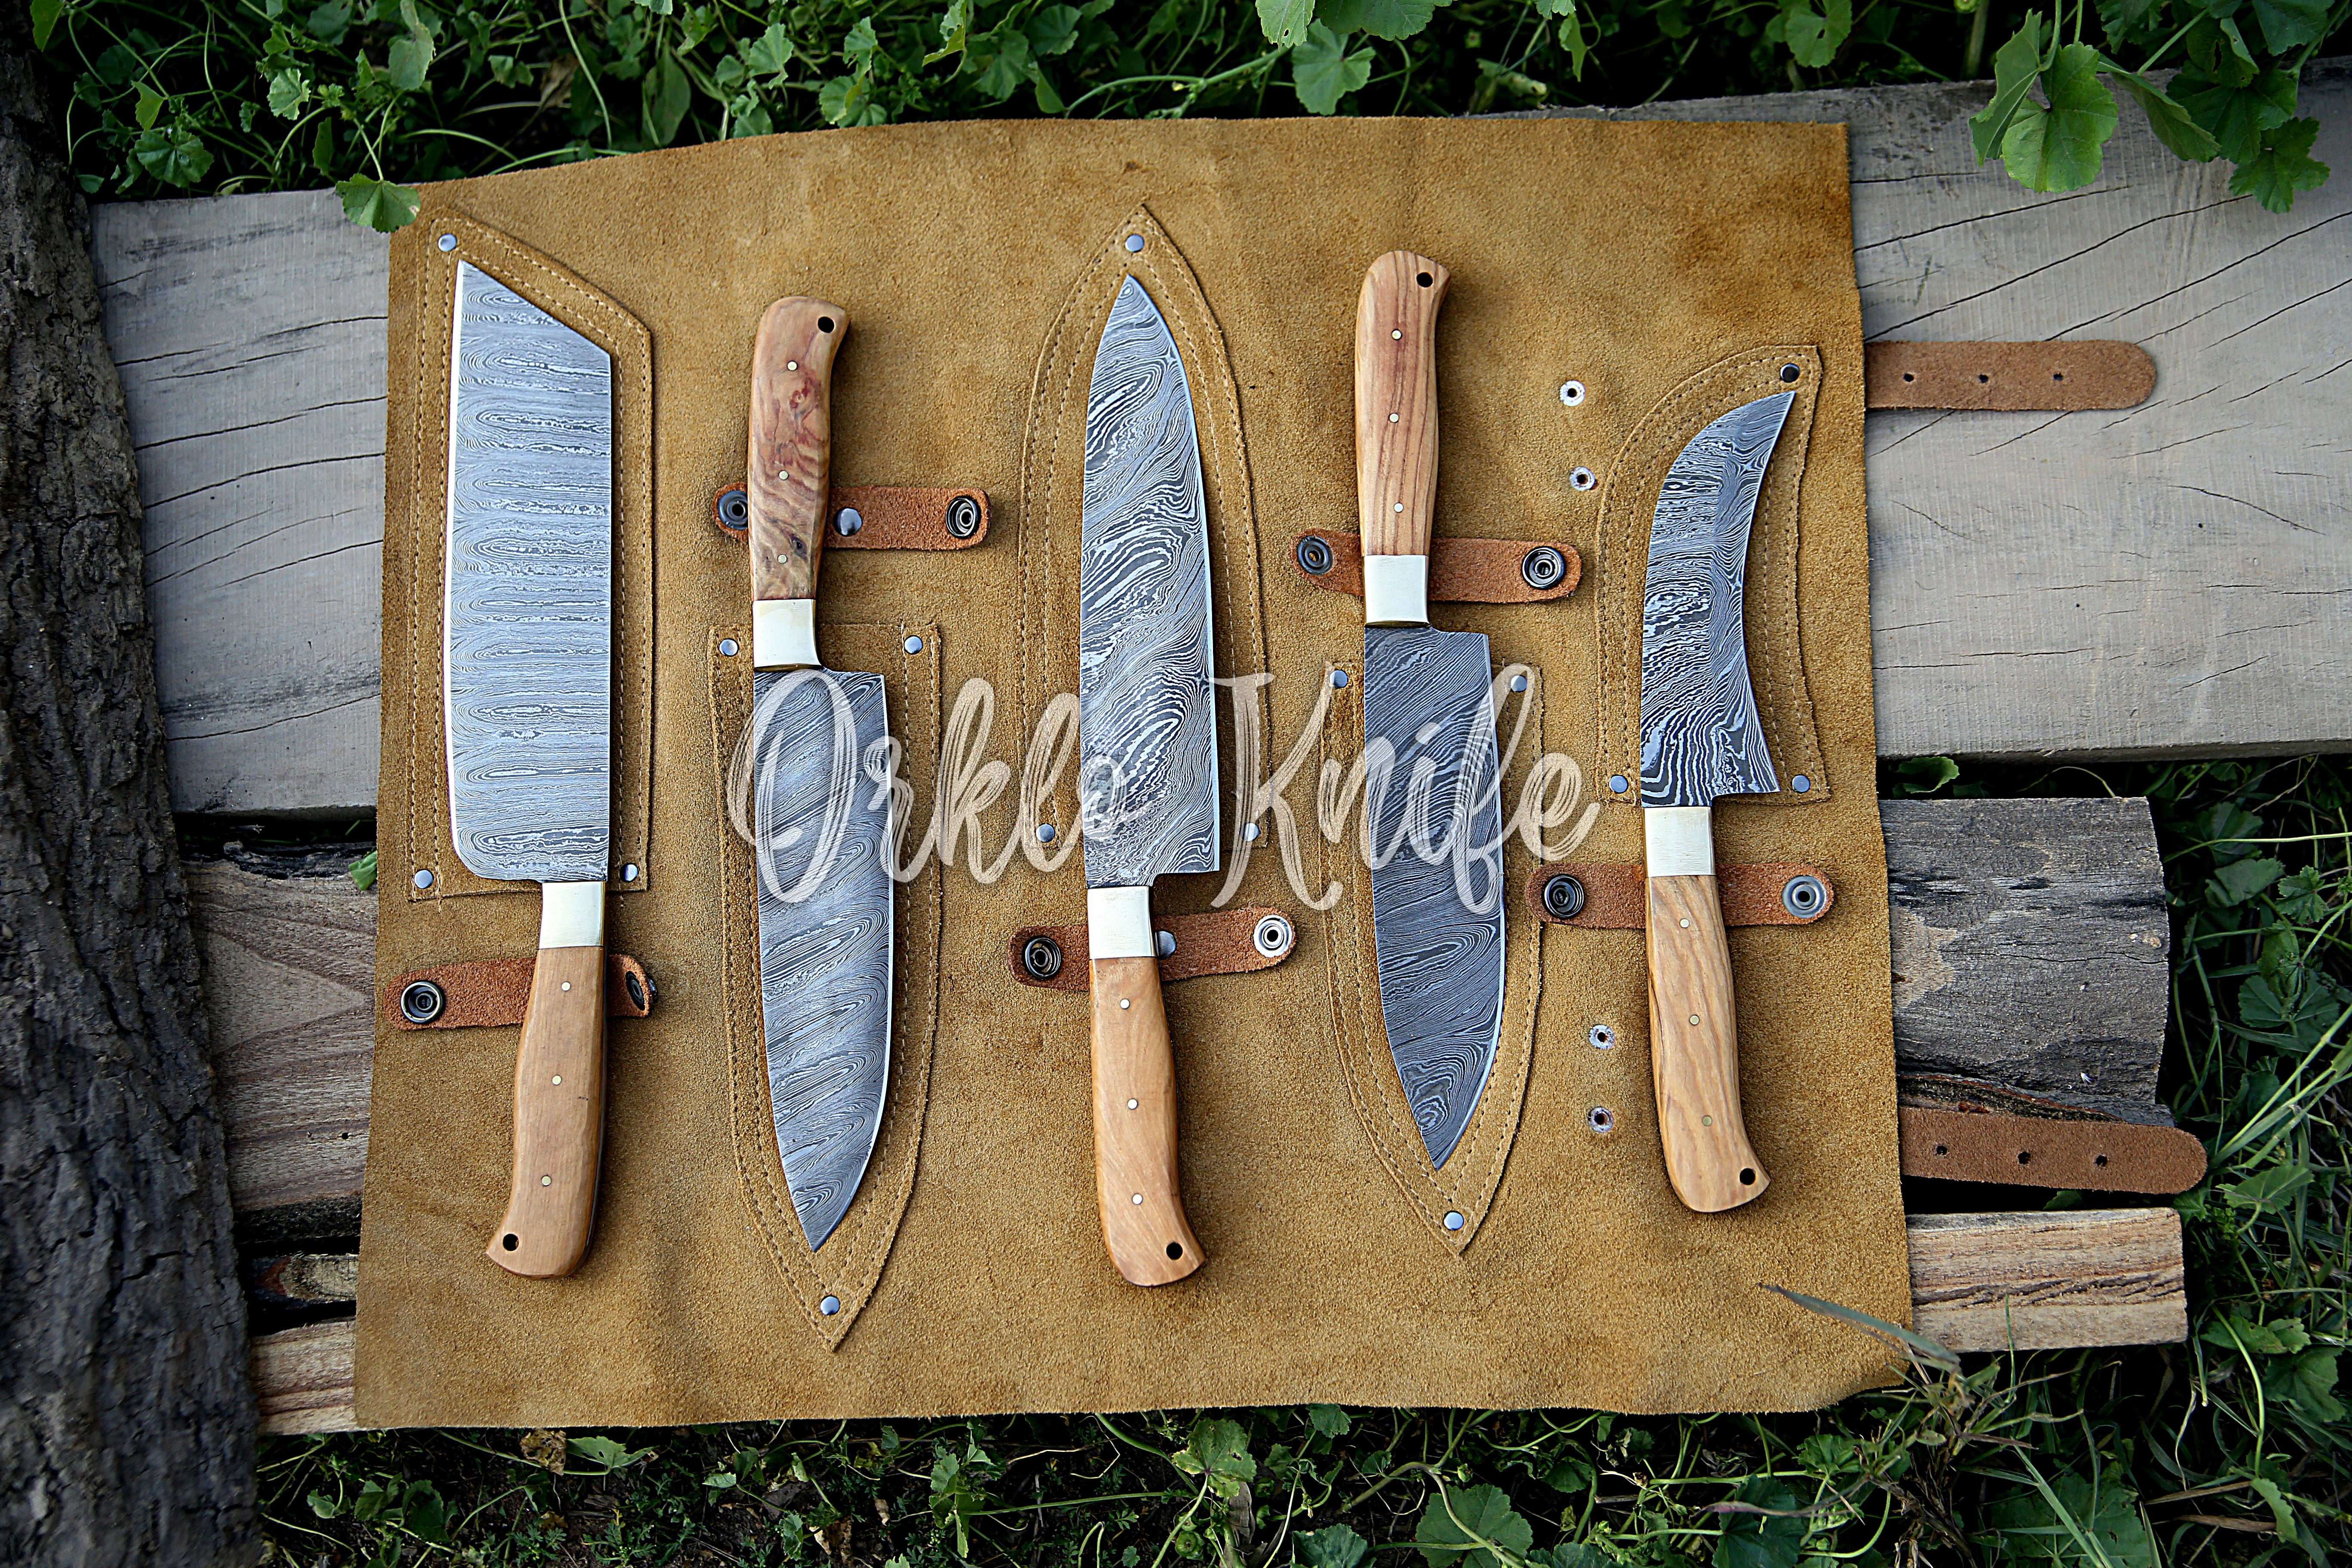 Custom Handmade Damascus steel chef/Kitchen knife set of 5 PCS with Le